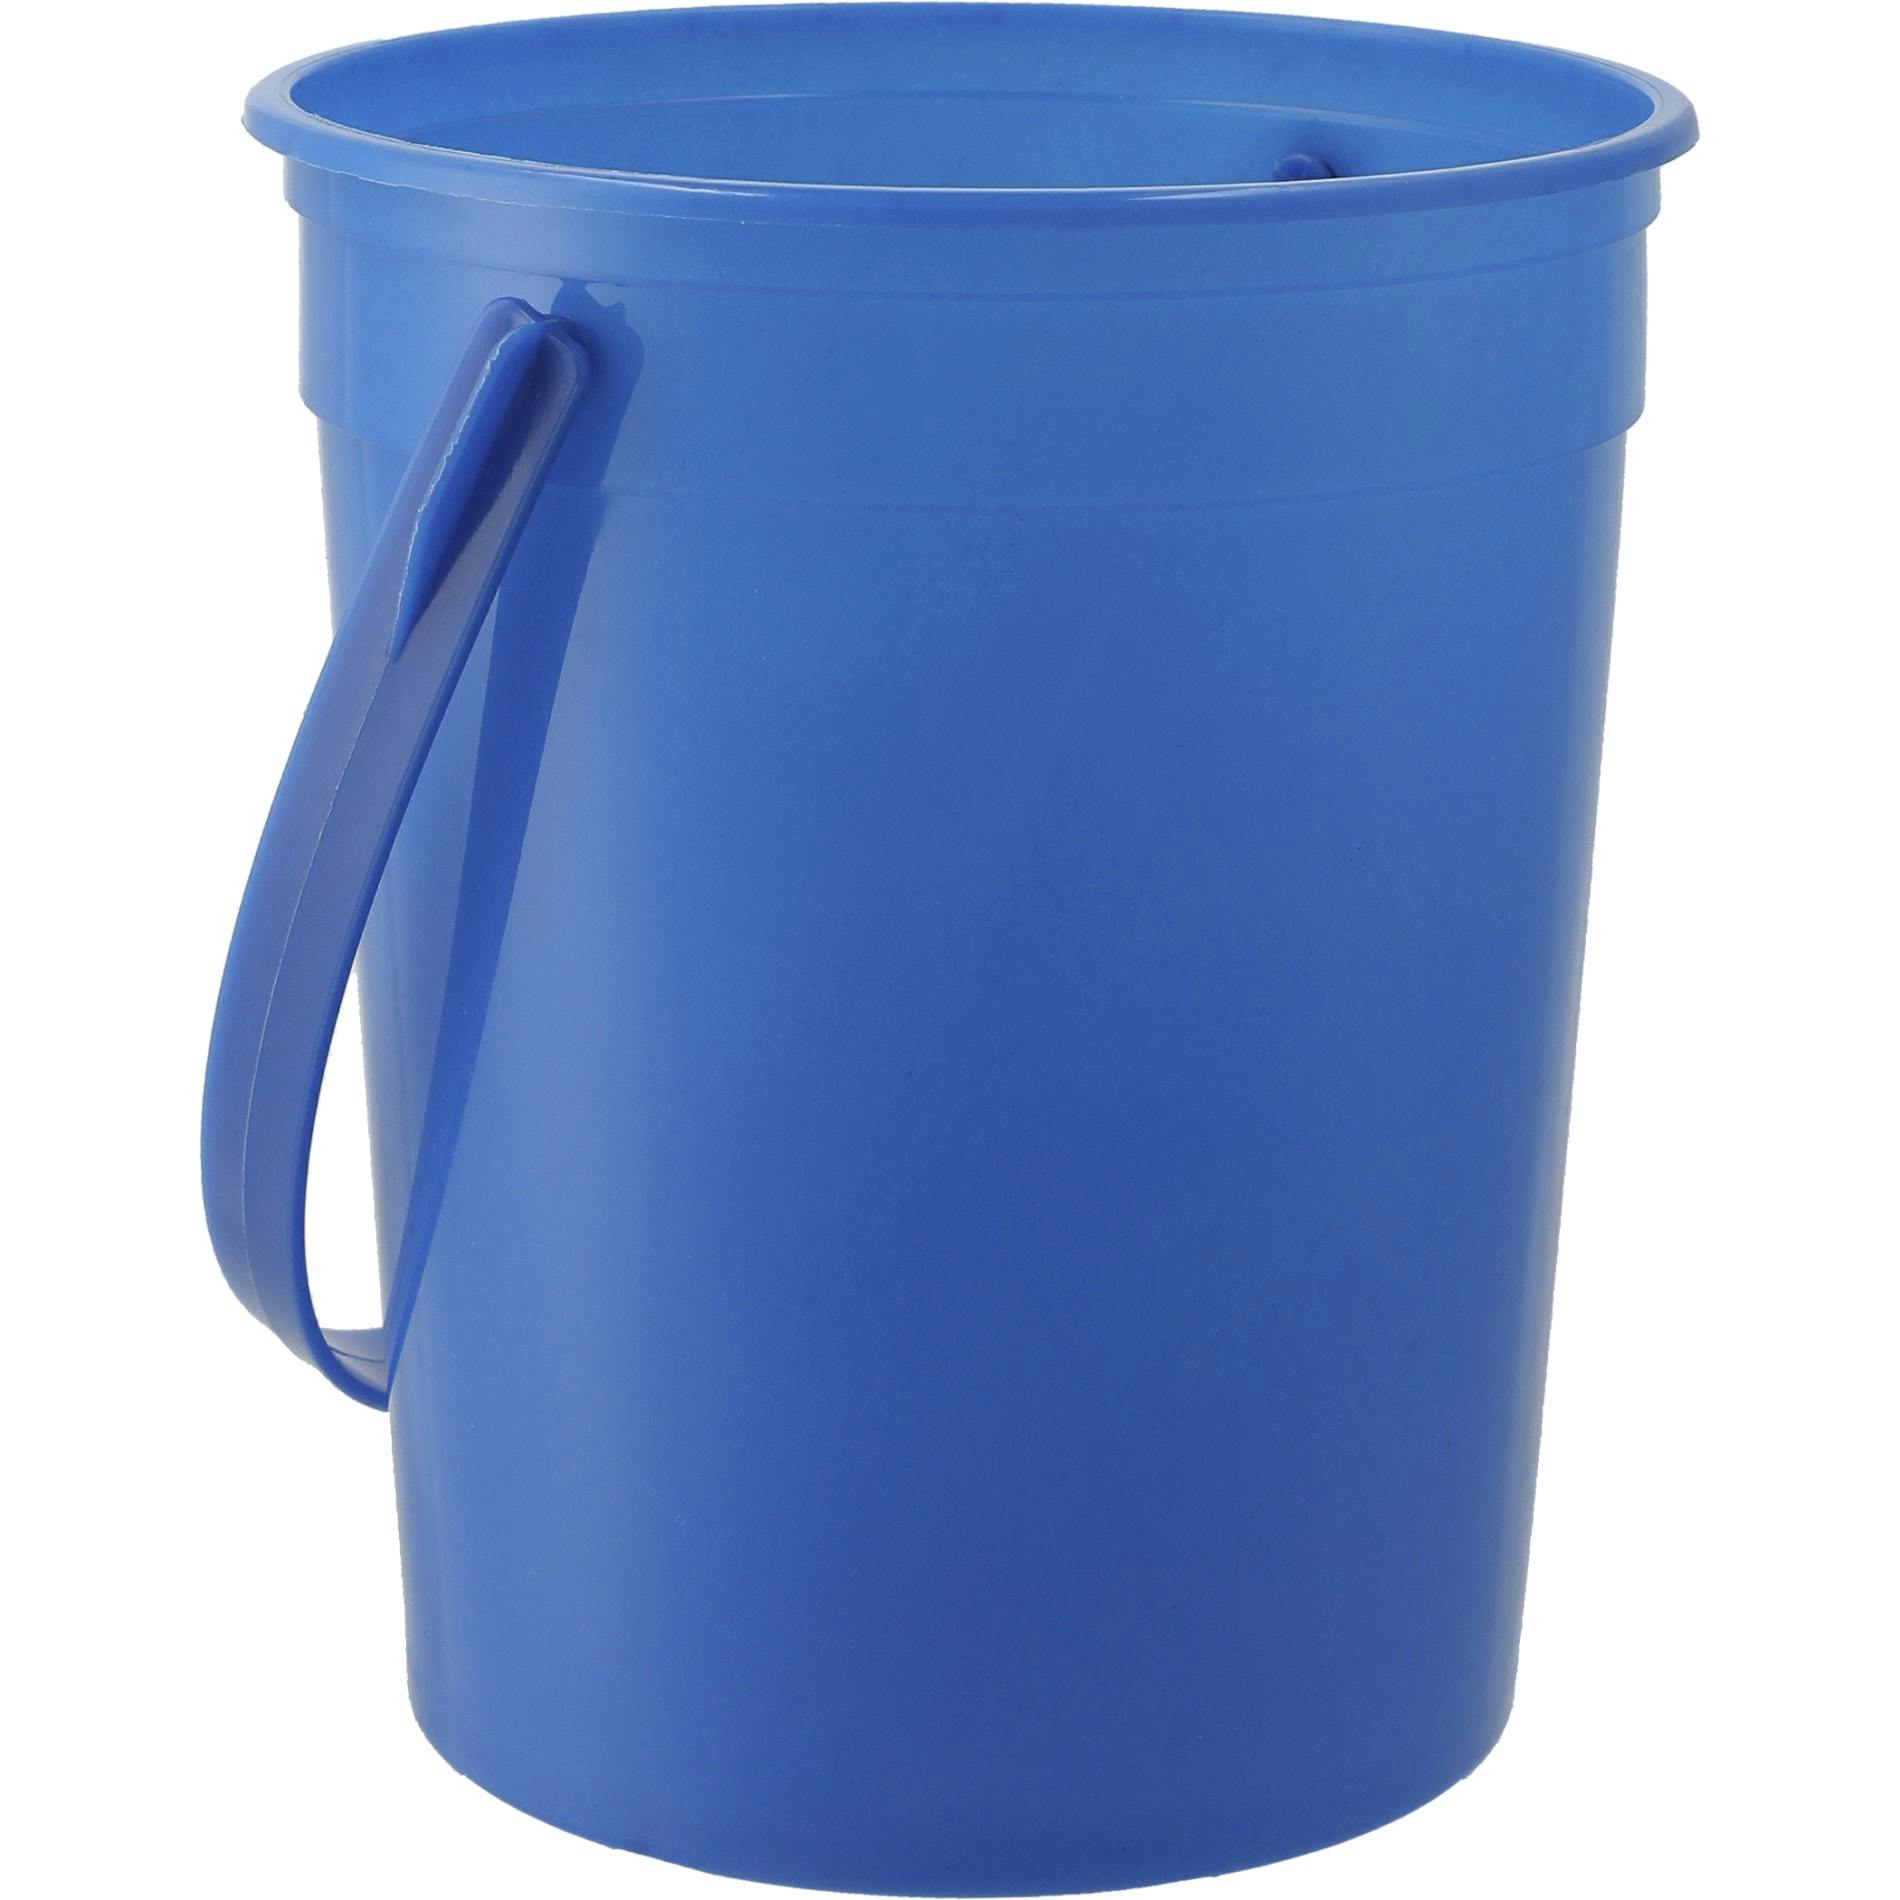 32oz Pail with Handle - additional Image 2